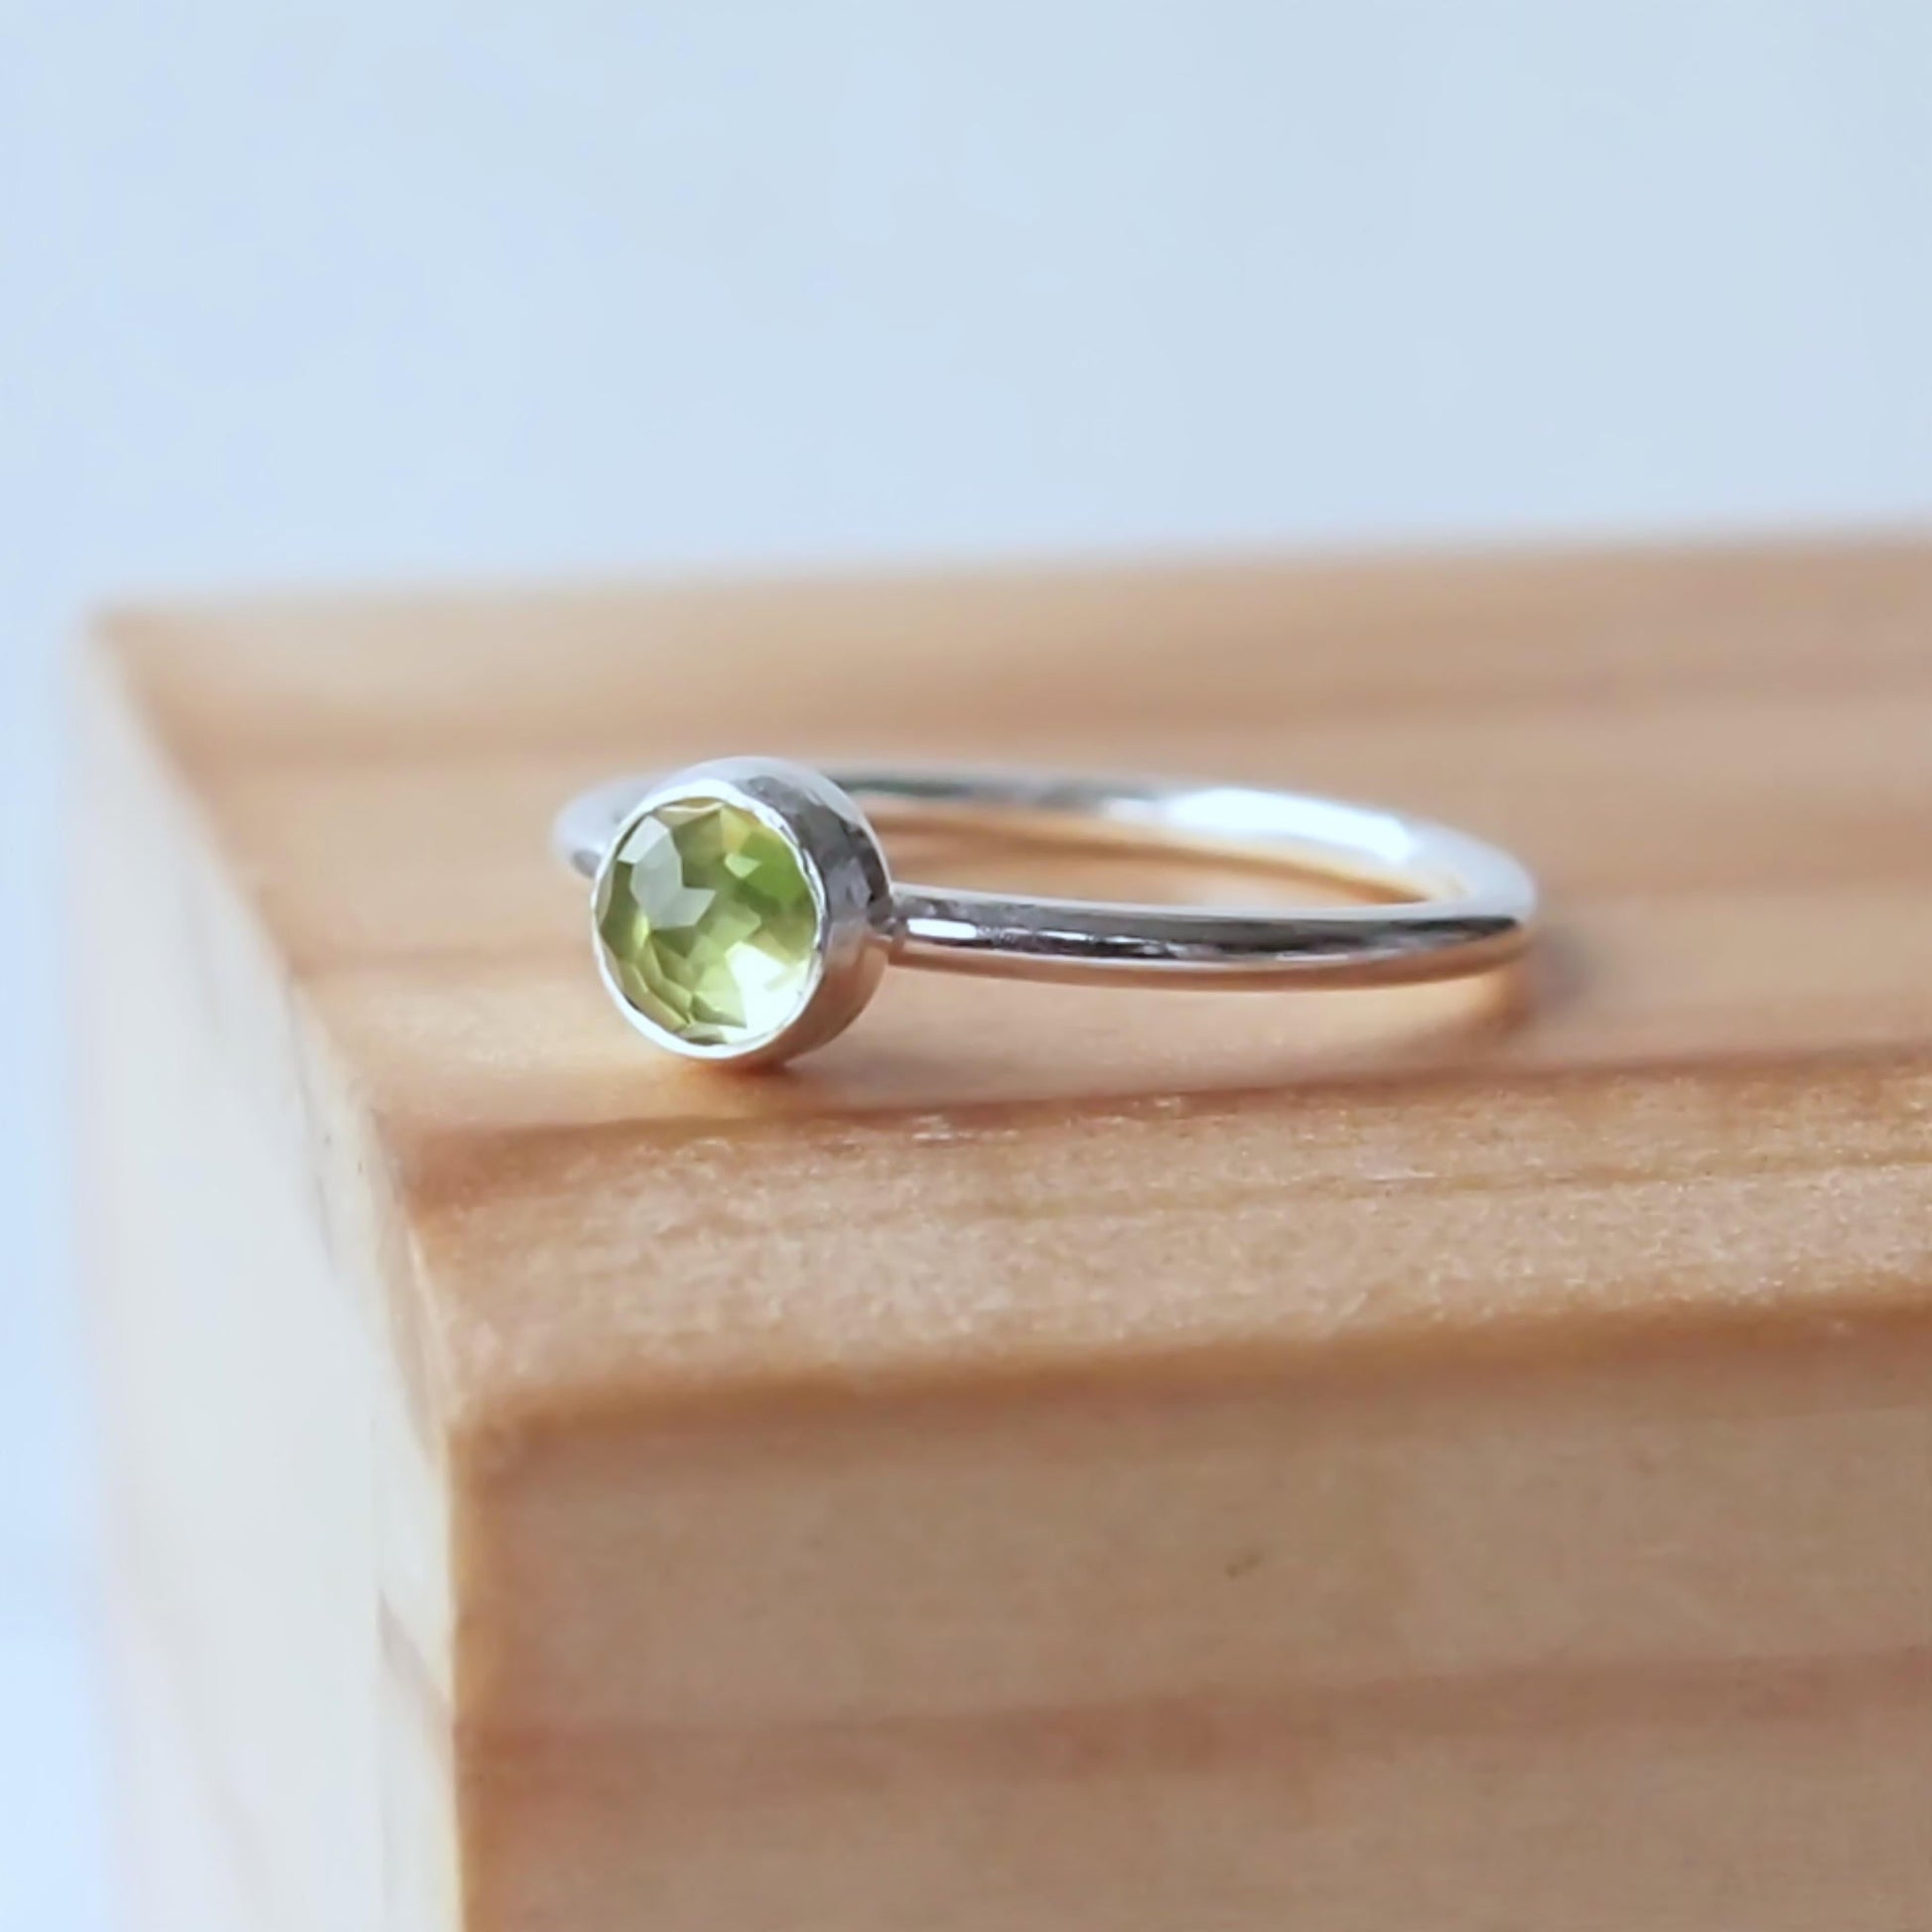 Sterling Silver and pale green Peridot gemstone, a round facet cut cabochon. Simple and minimalist in style. Handmade Jewellery in Edinburgh UK